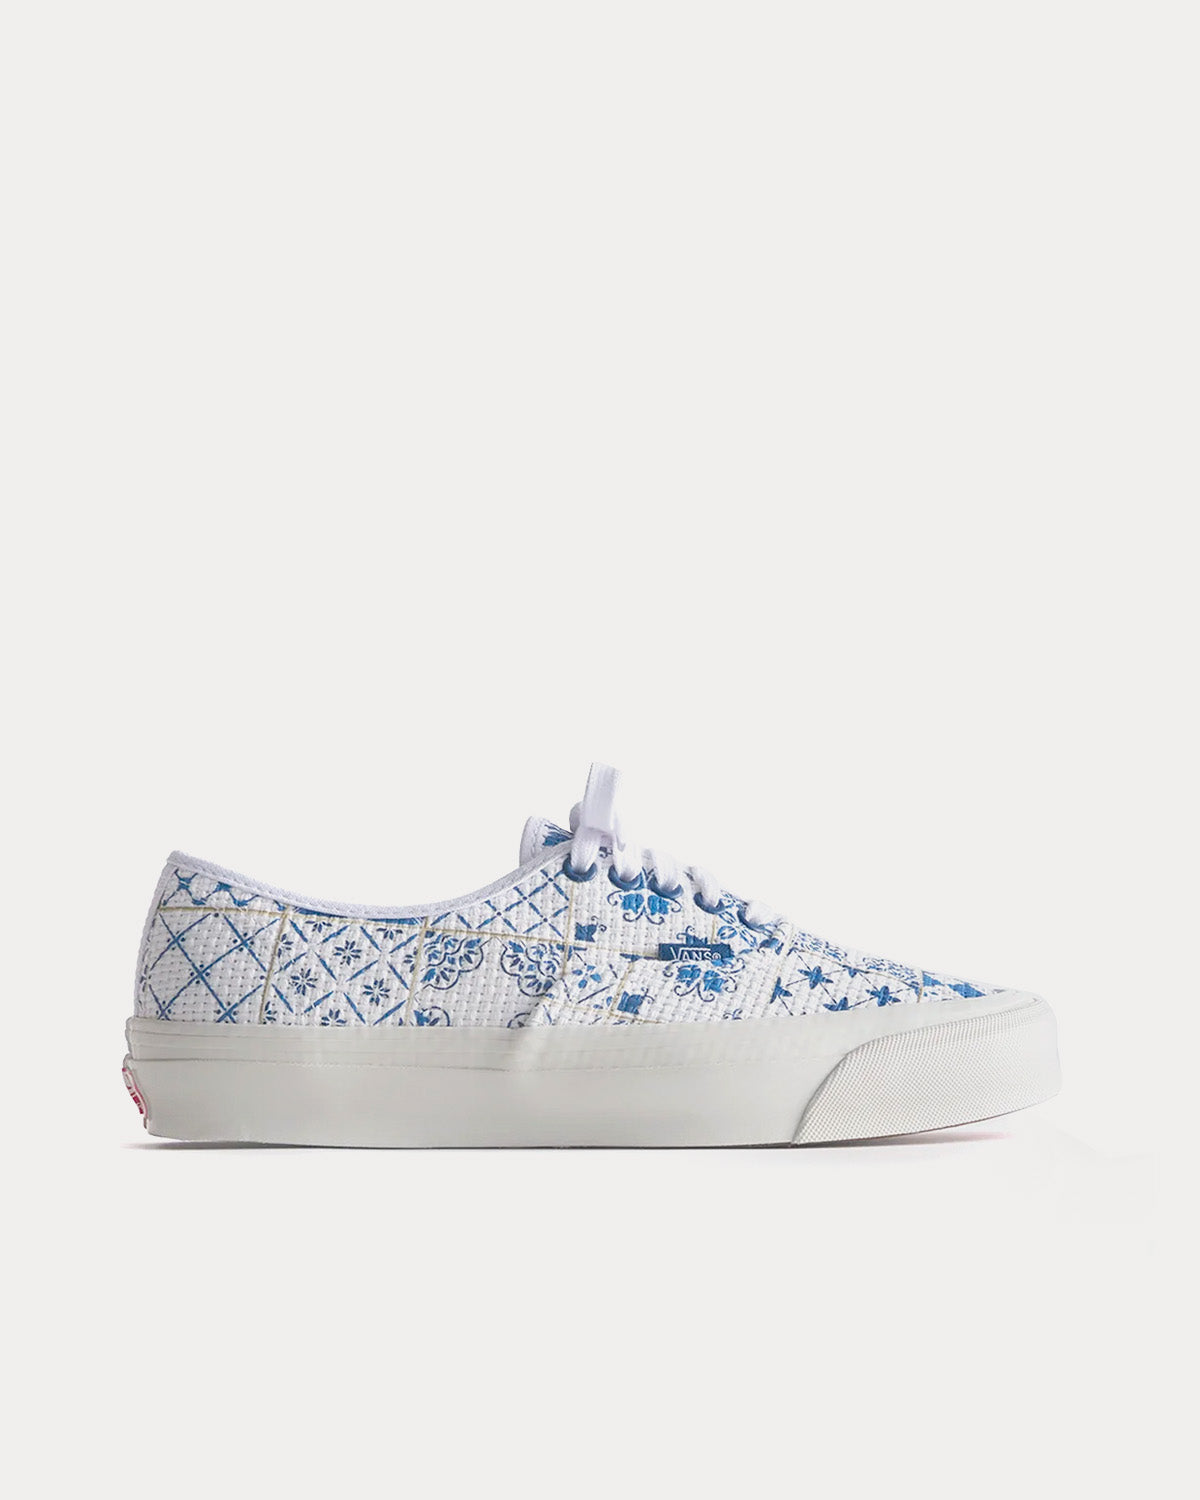 Vans x Kith - Azulejo Tile OG Authentic LX White Low Top Sneakers